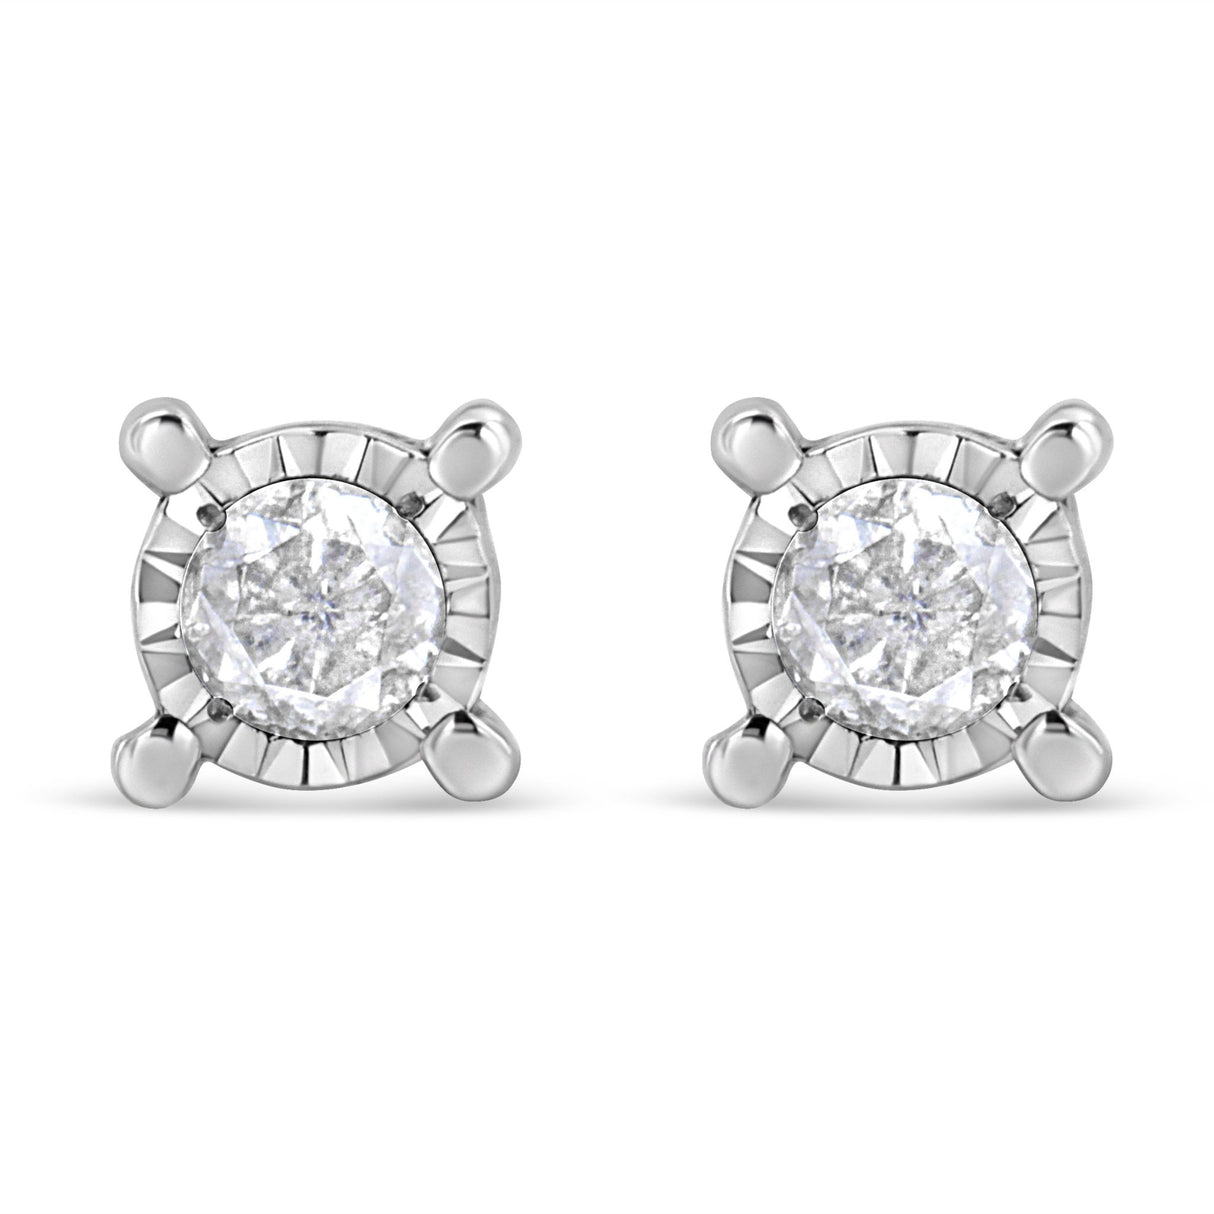 .925 Sterling Silver 1.0 Cttw Round Brilliant-Cut Diamond Miracle-Set Solitaire Stud Earrings (H-I Color, I2-I3 Clarity) - Tuesday Morning-Stud Earrings